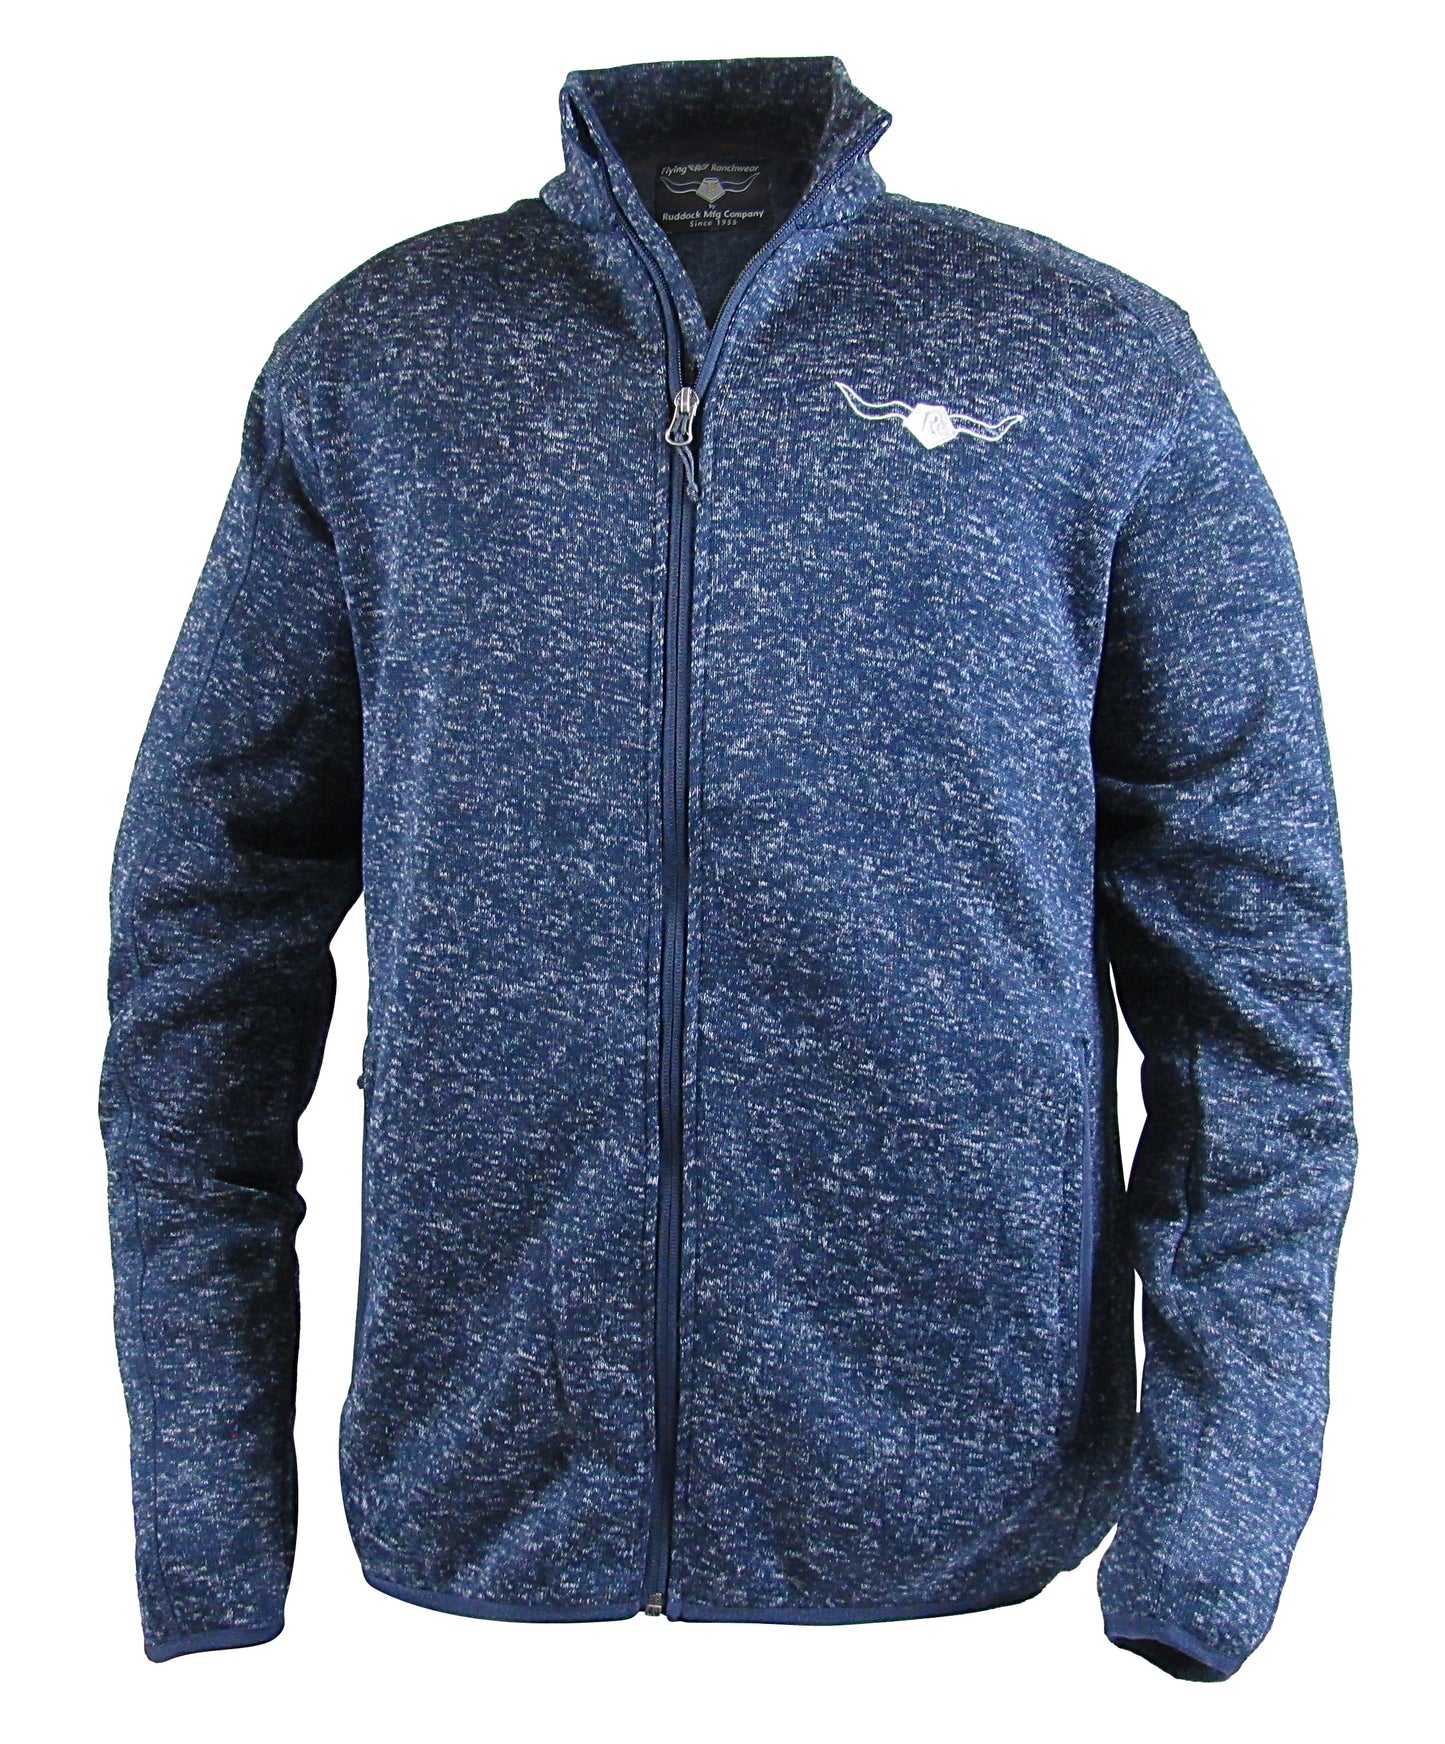 Fleece jacket with pockets and Flying R embroidery on chest in navy blue heather